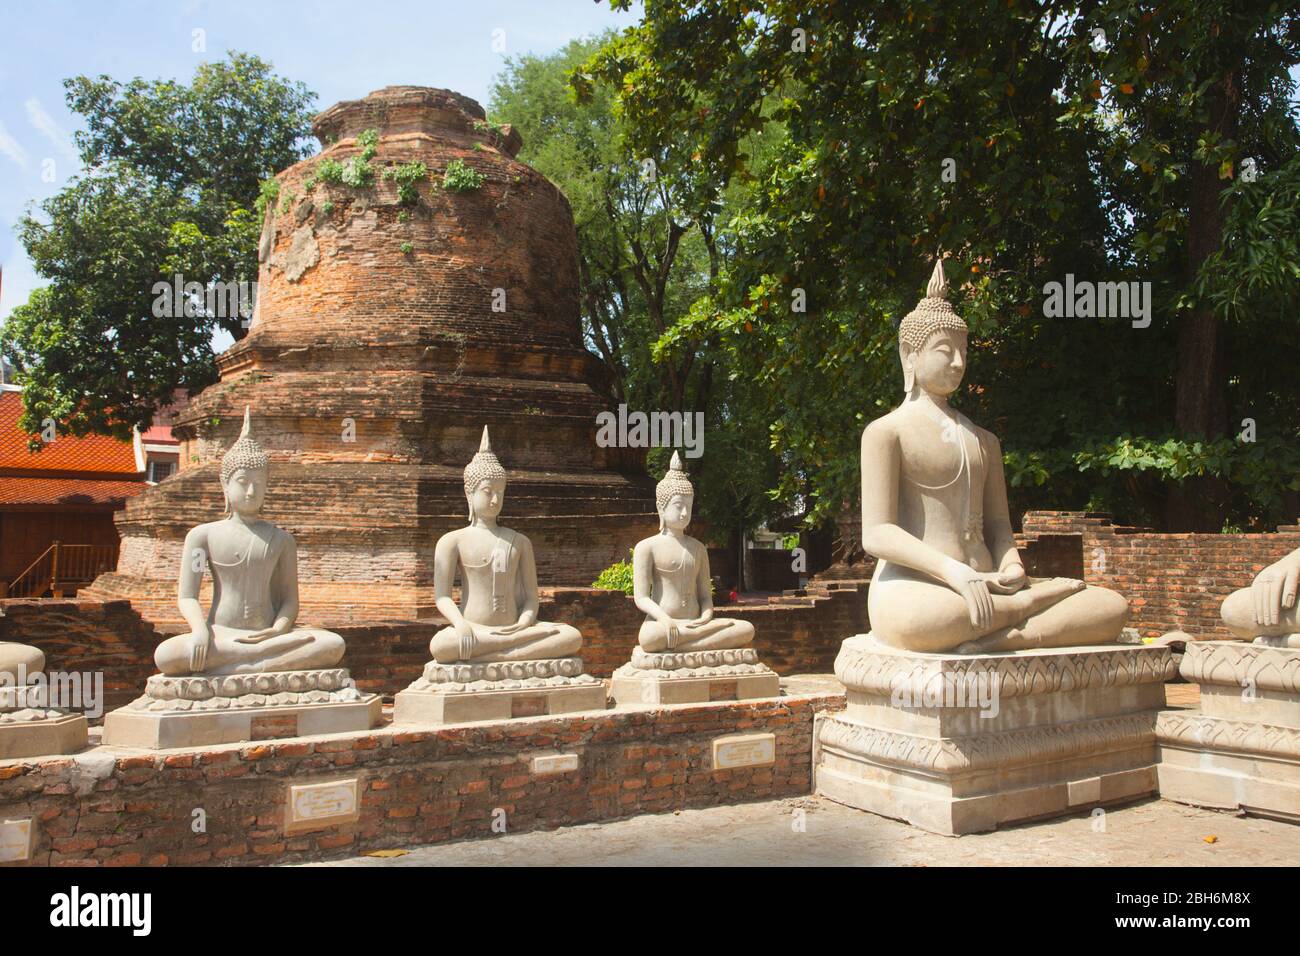 Buddha Statues in Ayuttaya  the ancient city and former capital of Siam, present day Thailand, Destroyed in a battle with Burma in 1767 Stock Photo